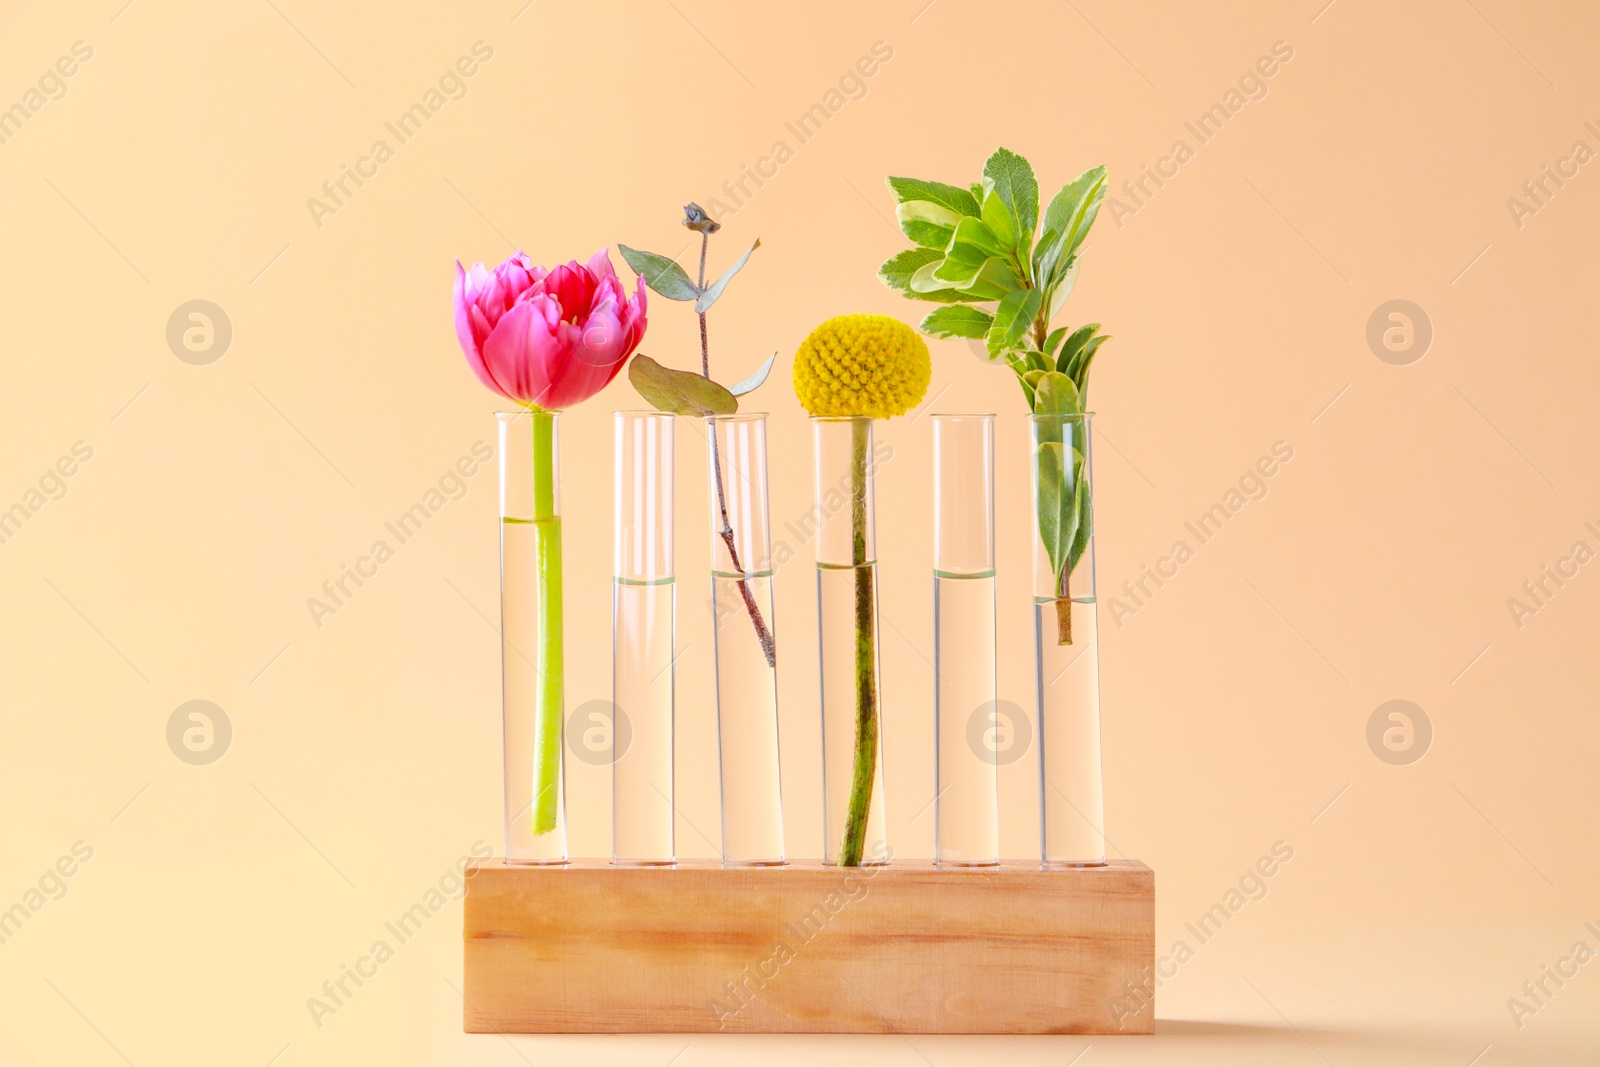 Photo of Test tubes with different plants in wooden stand on beige background